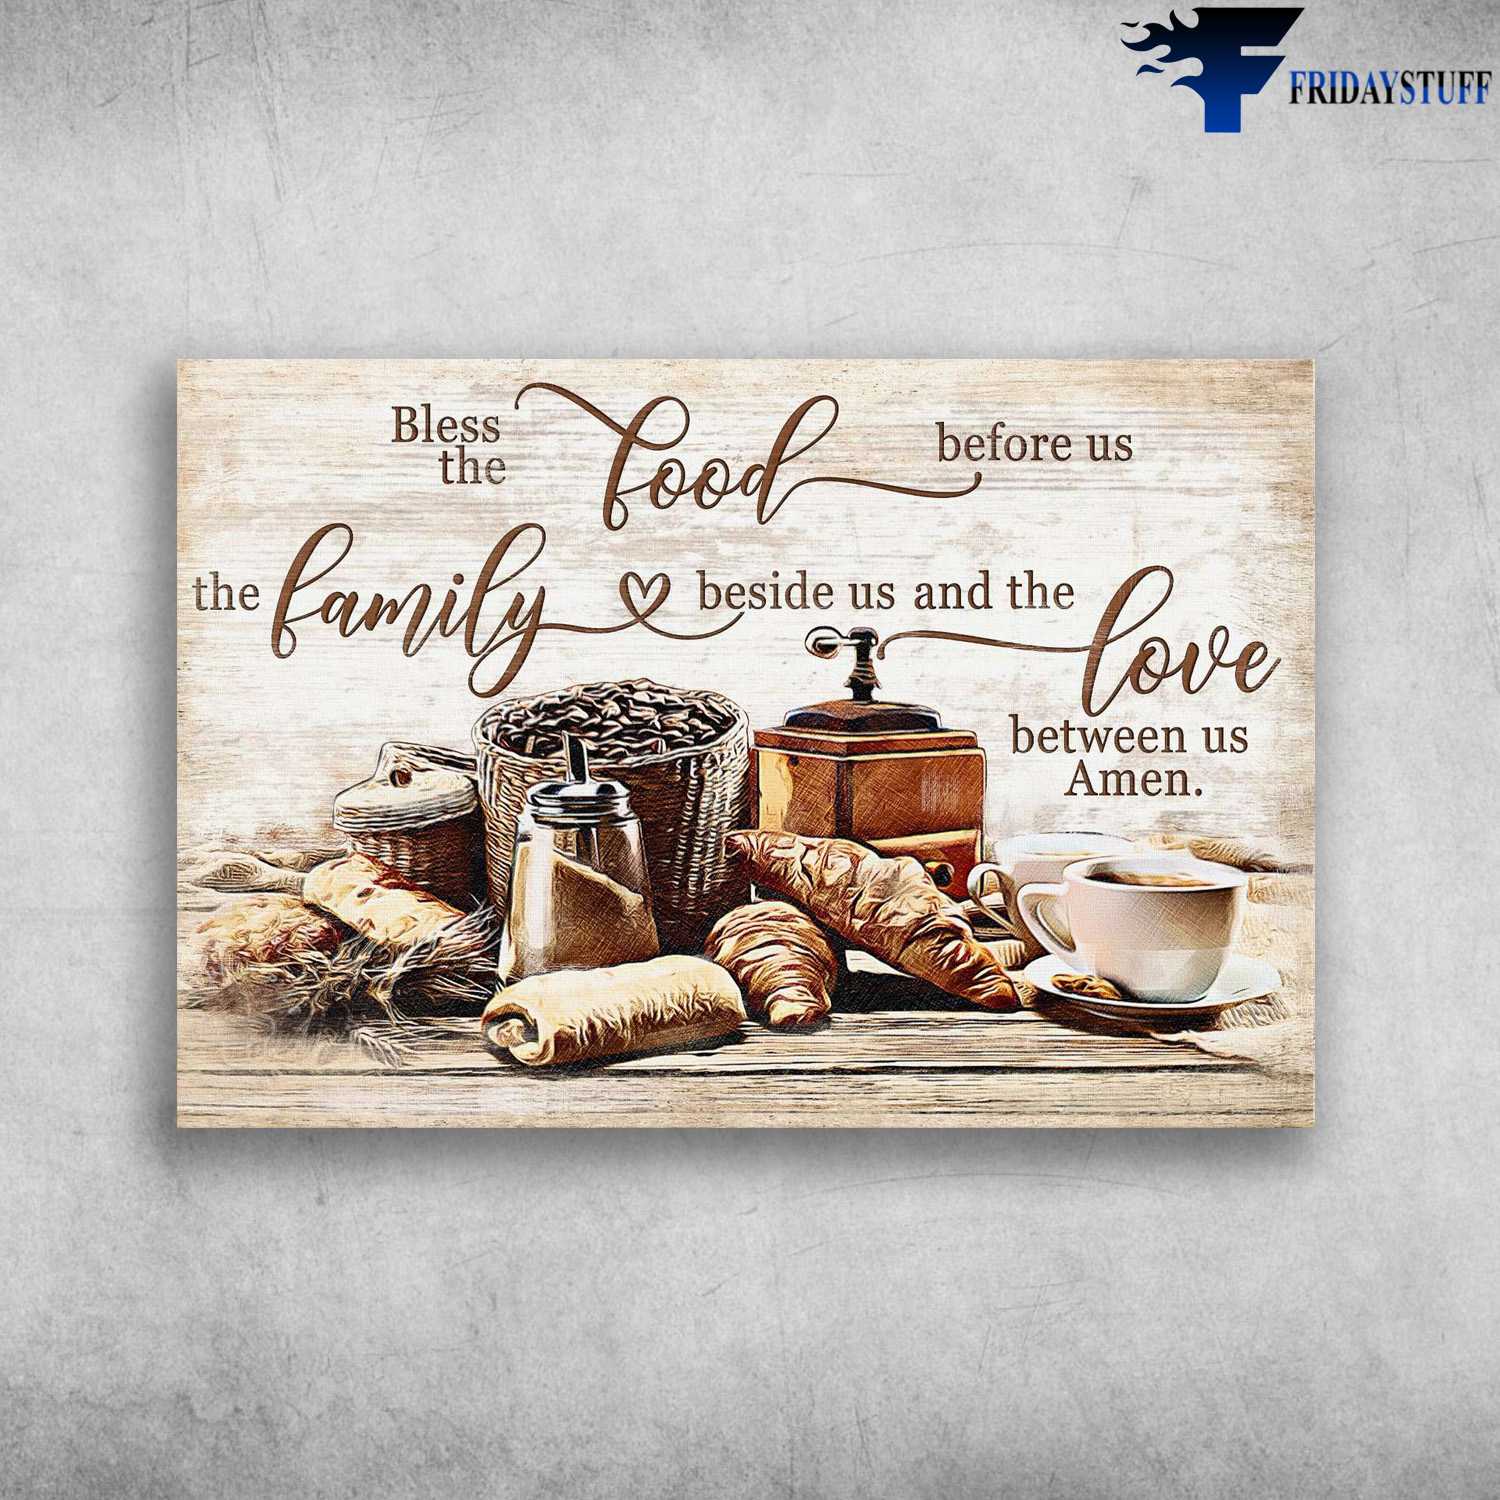 Bread Coffee - Food And Drink, Bless The Food Before Us, The Family Beside Us And The Love Between Us, Amen